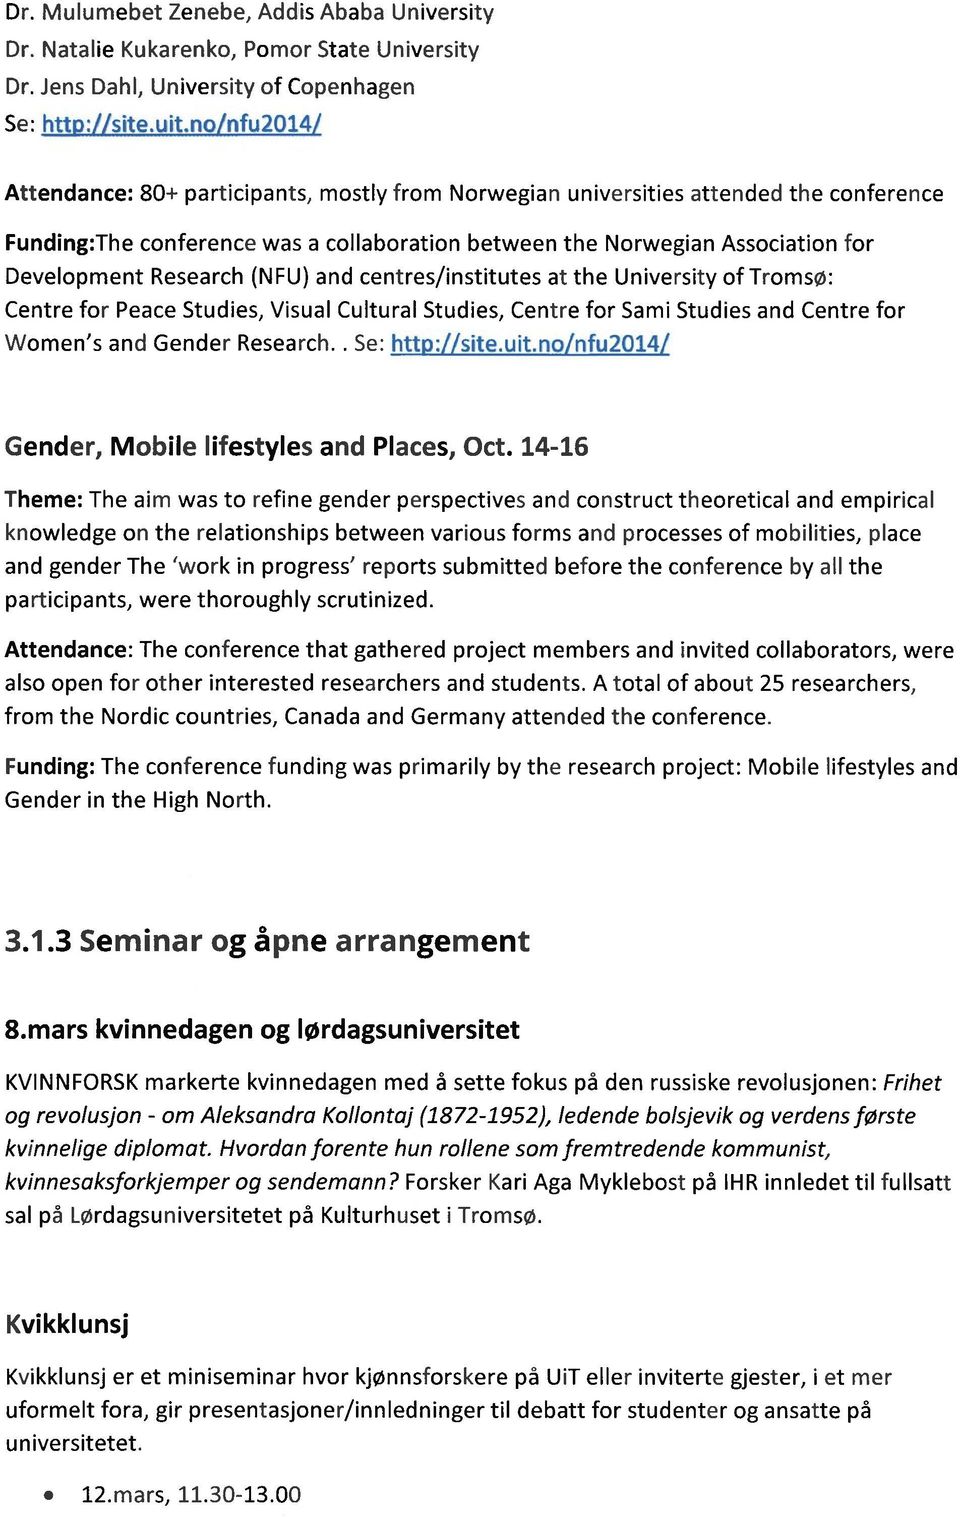 Research (NFU) and centres/institutes at the University of : Centre for Peace Studies, Visual Cultural Studies, Centre for Sami Studies and Centre for Women's and Gender Research.. Se: htt : site.uit.